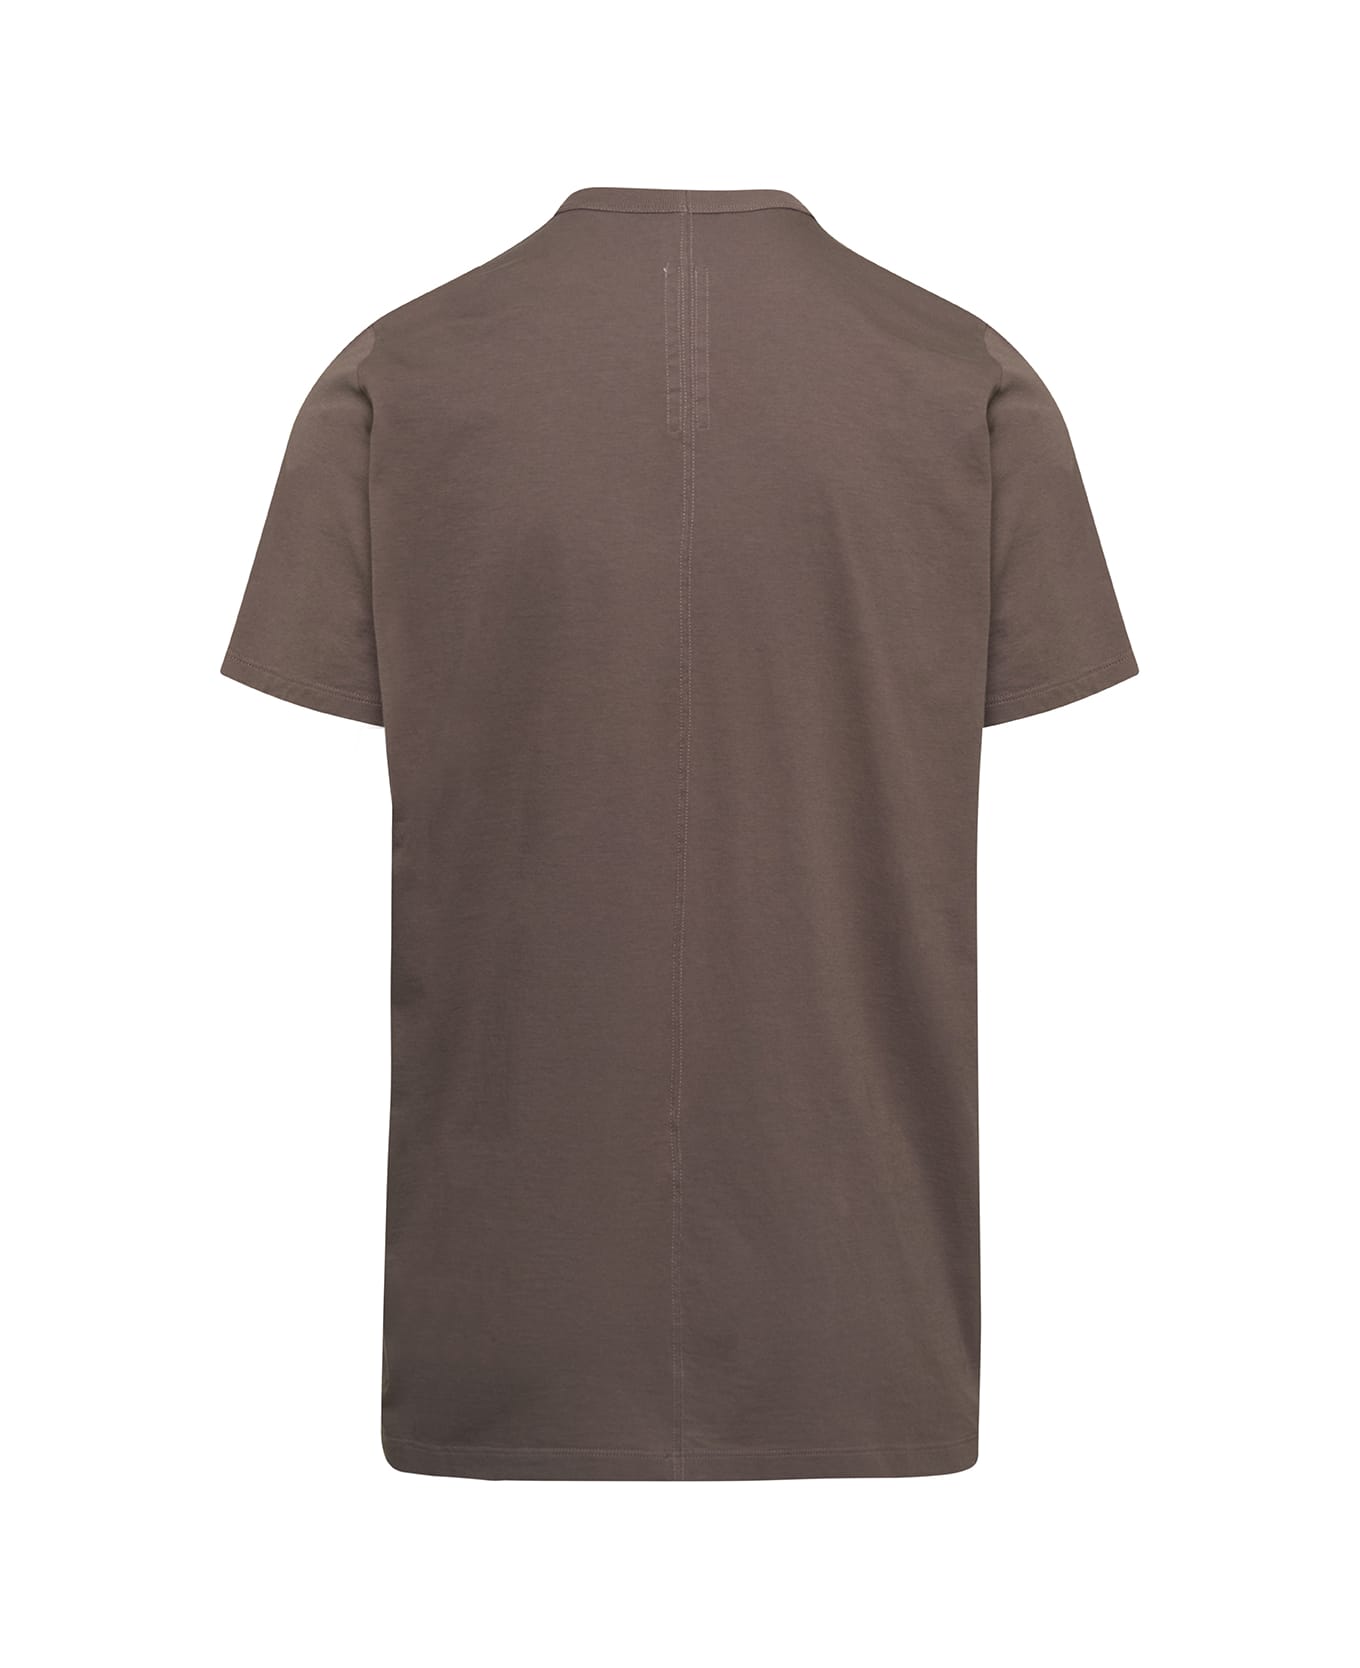 Rick Owens Beige Level T T-shirt With Vertical Seams On The Back In Cotton Man - Beige